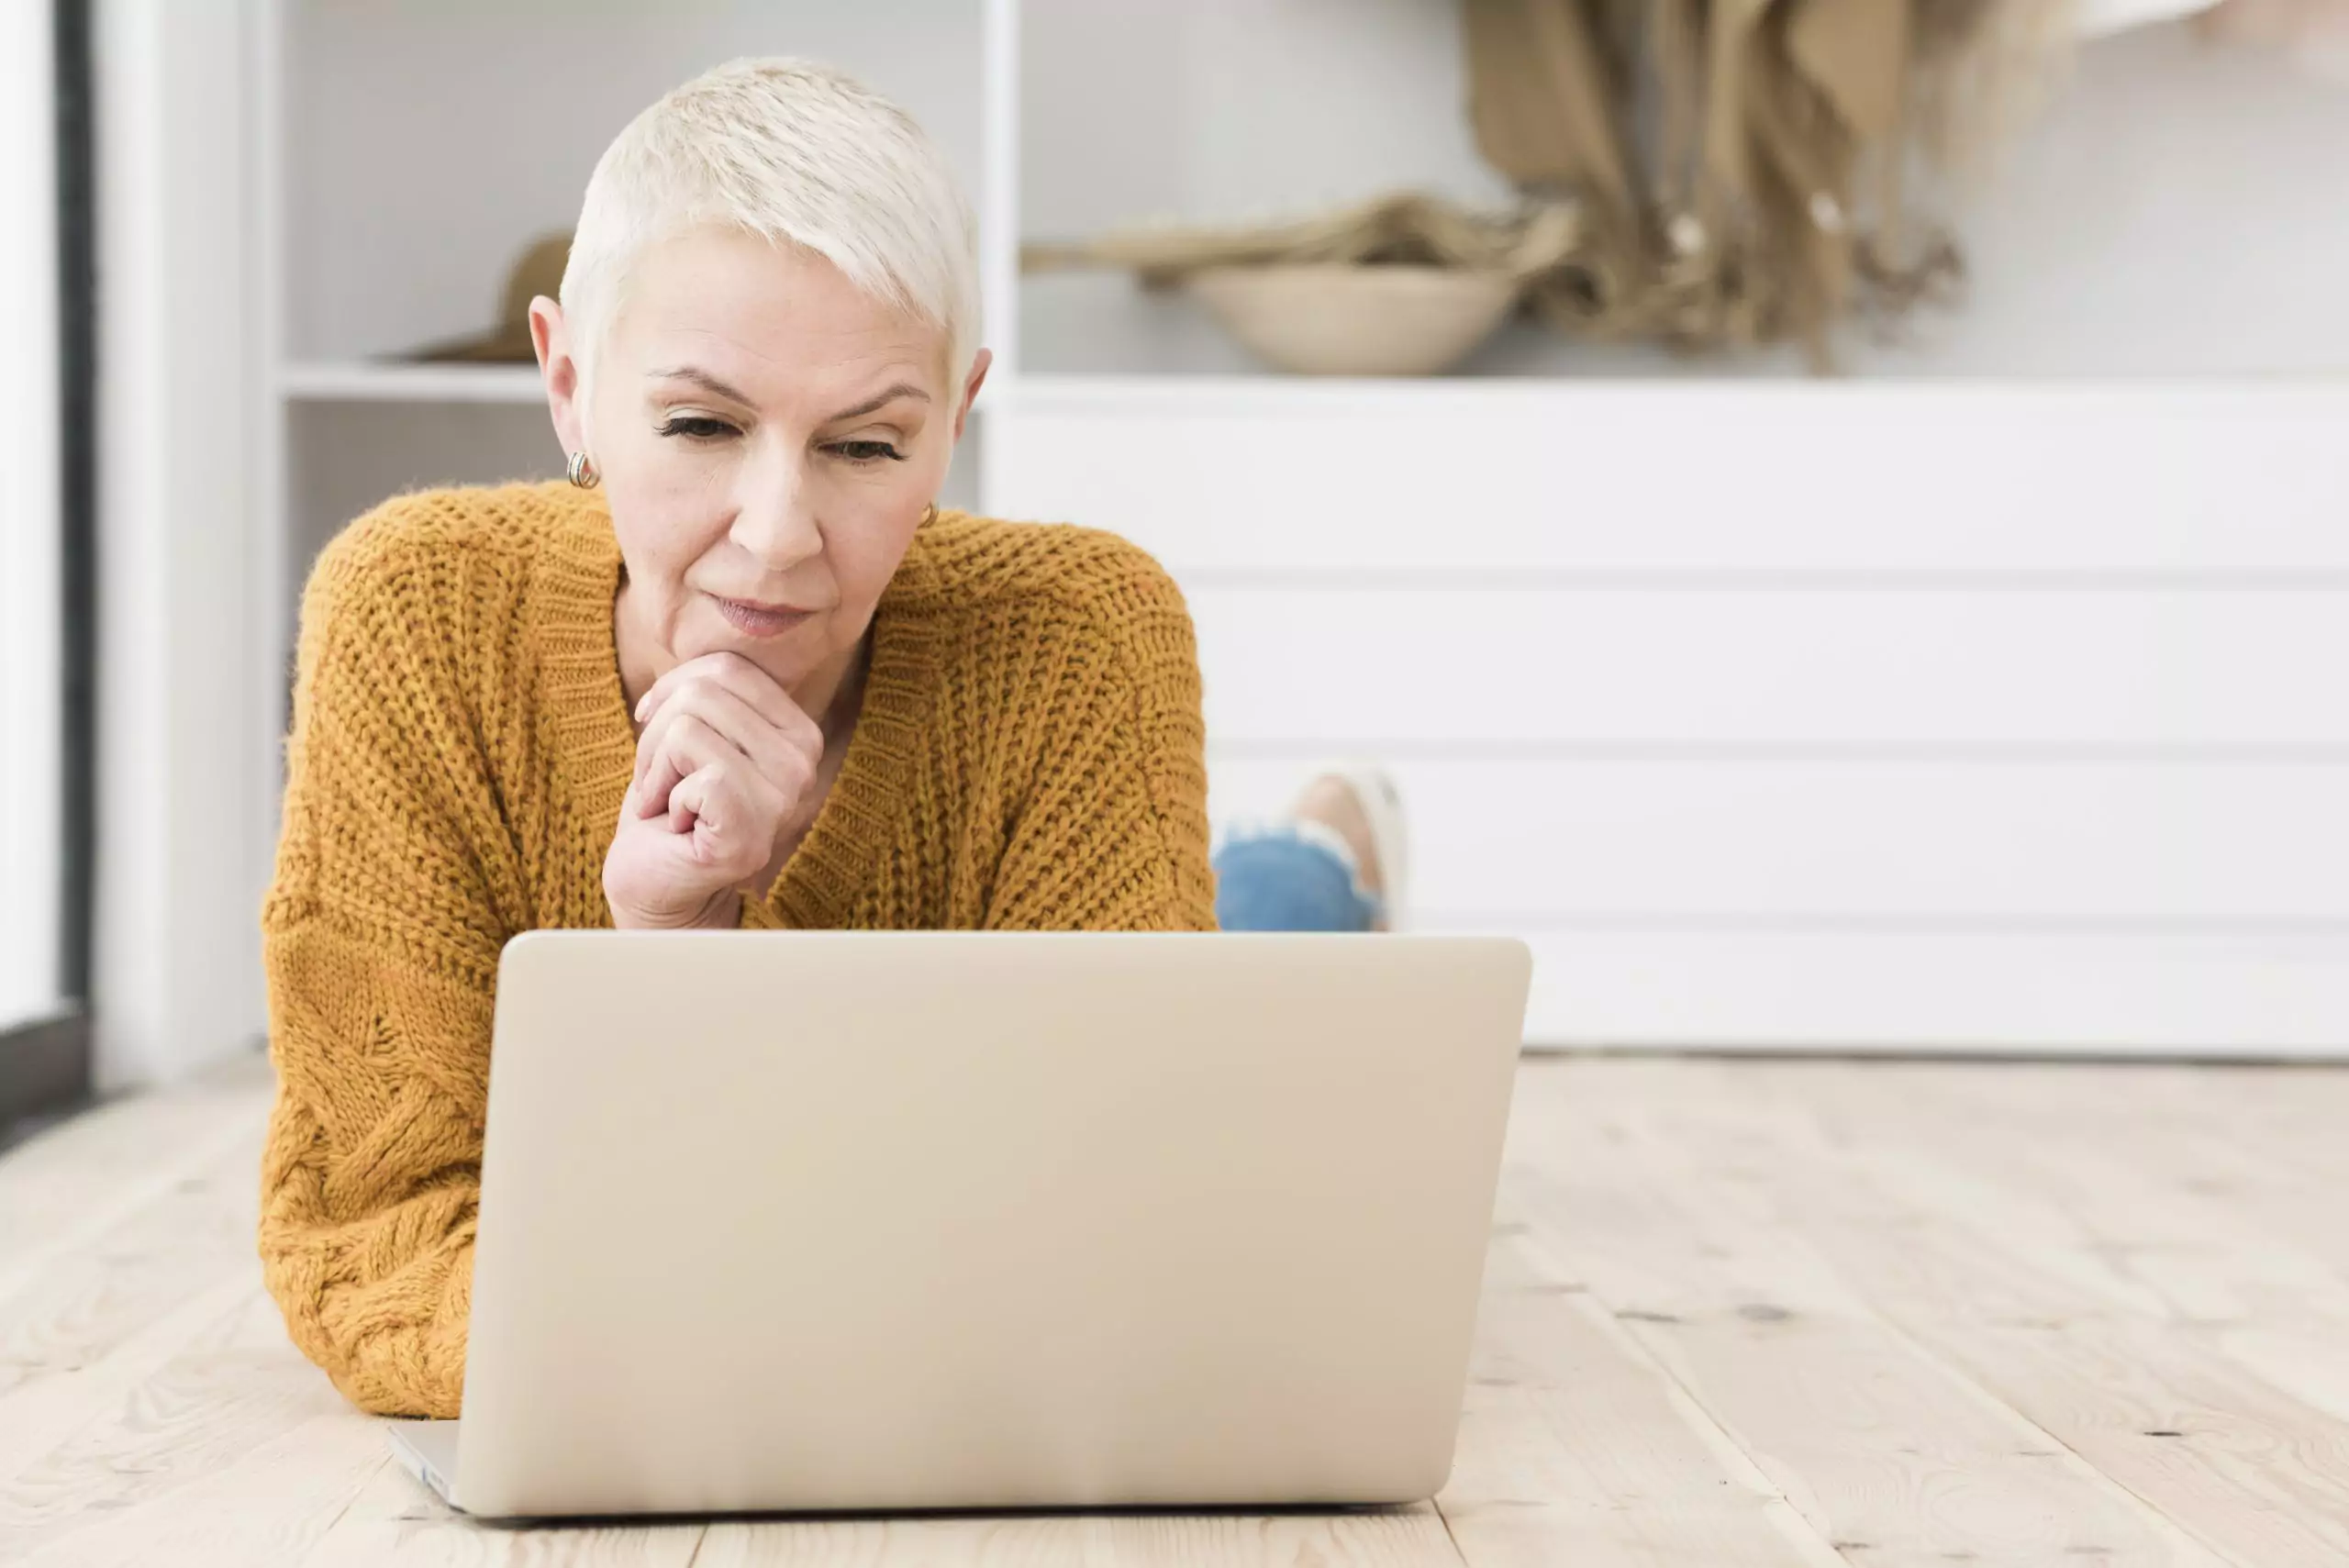 Older woman laying on floor looking at laptop considering second opinion on fibroids